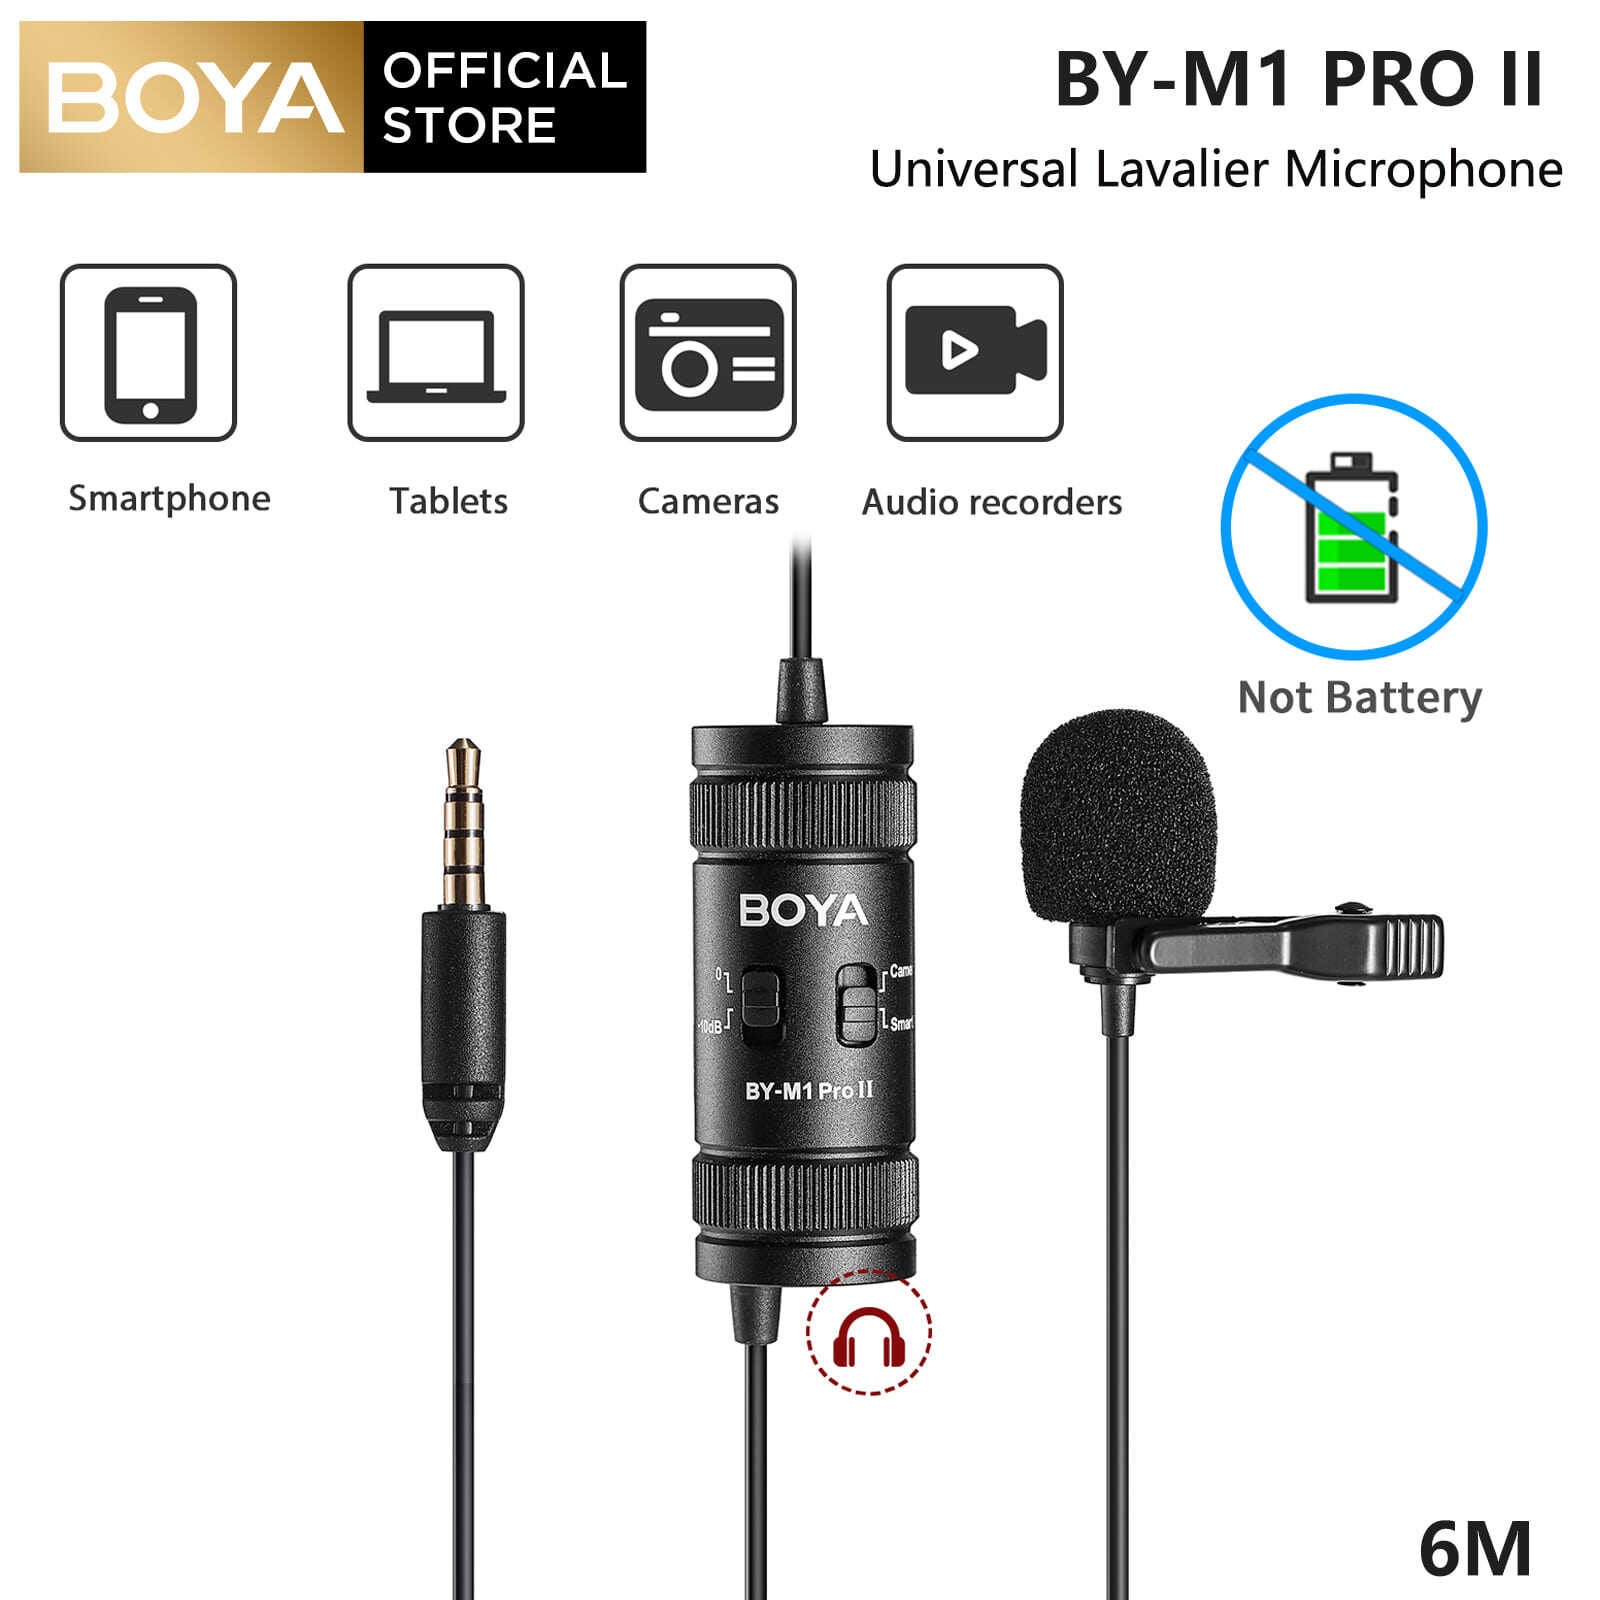 Windows　Pro　Lazada　II　Clip-On　Tablet　YouTube　Skype　Smartphones（6M）　Condenser　3.5mm　Podcasting　Upgrade　for　Jack　Interview　Android　Microphone　3.5mm　iPhone　PS4　Lavalier　and　Recording　TRRS　BY-M1　Laptop　PH　BOYA　Smartphone